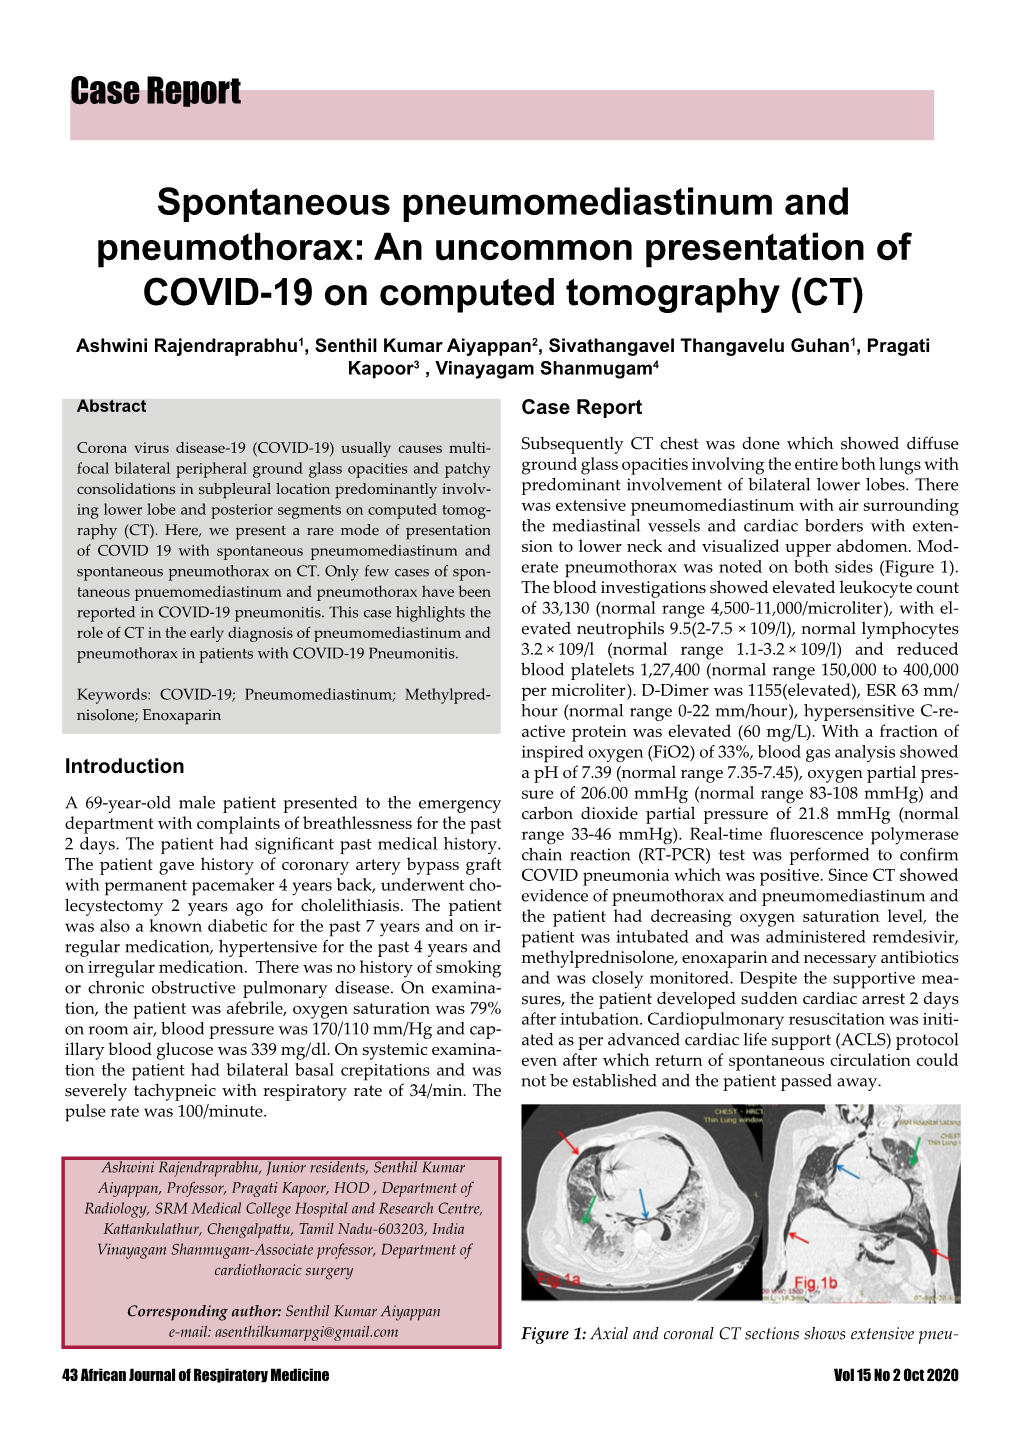 Spontaneous Pneumomediastinum and Pneumothorax: an Uncommon Presentation of COVID-19 on Computed Tomography (CT)